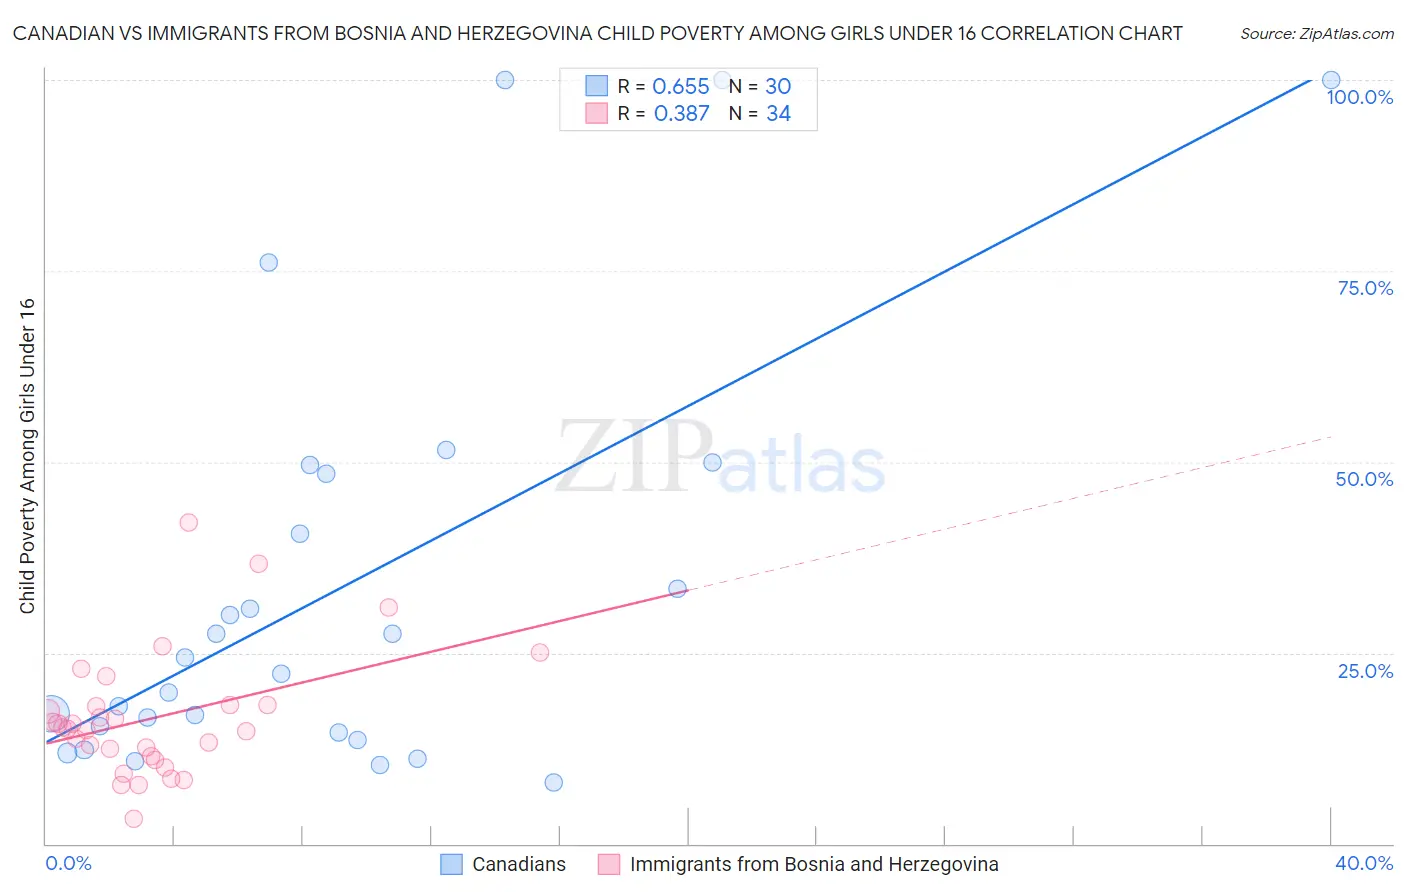 Canadian vs Immigrants from Bosnia and Herzegovina Child Poverty Among Girls Under 16